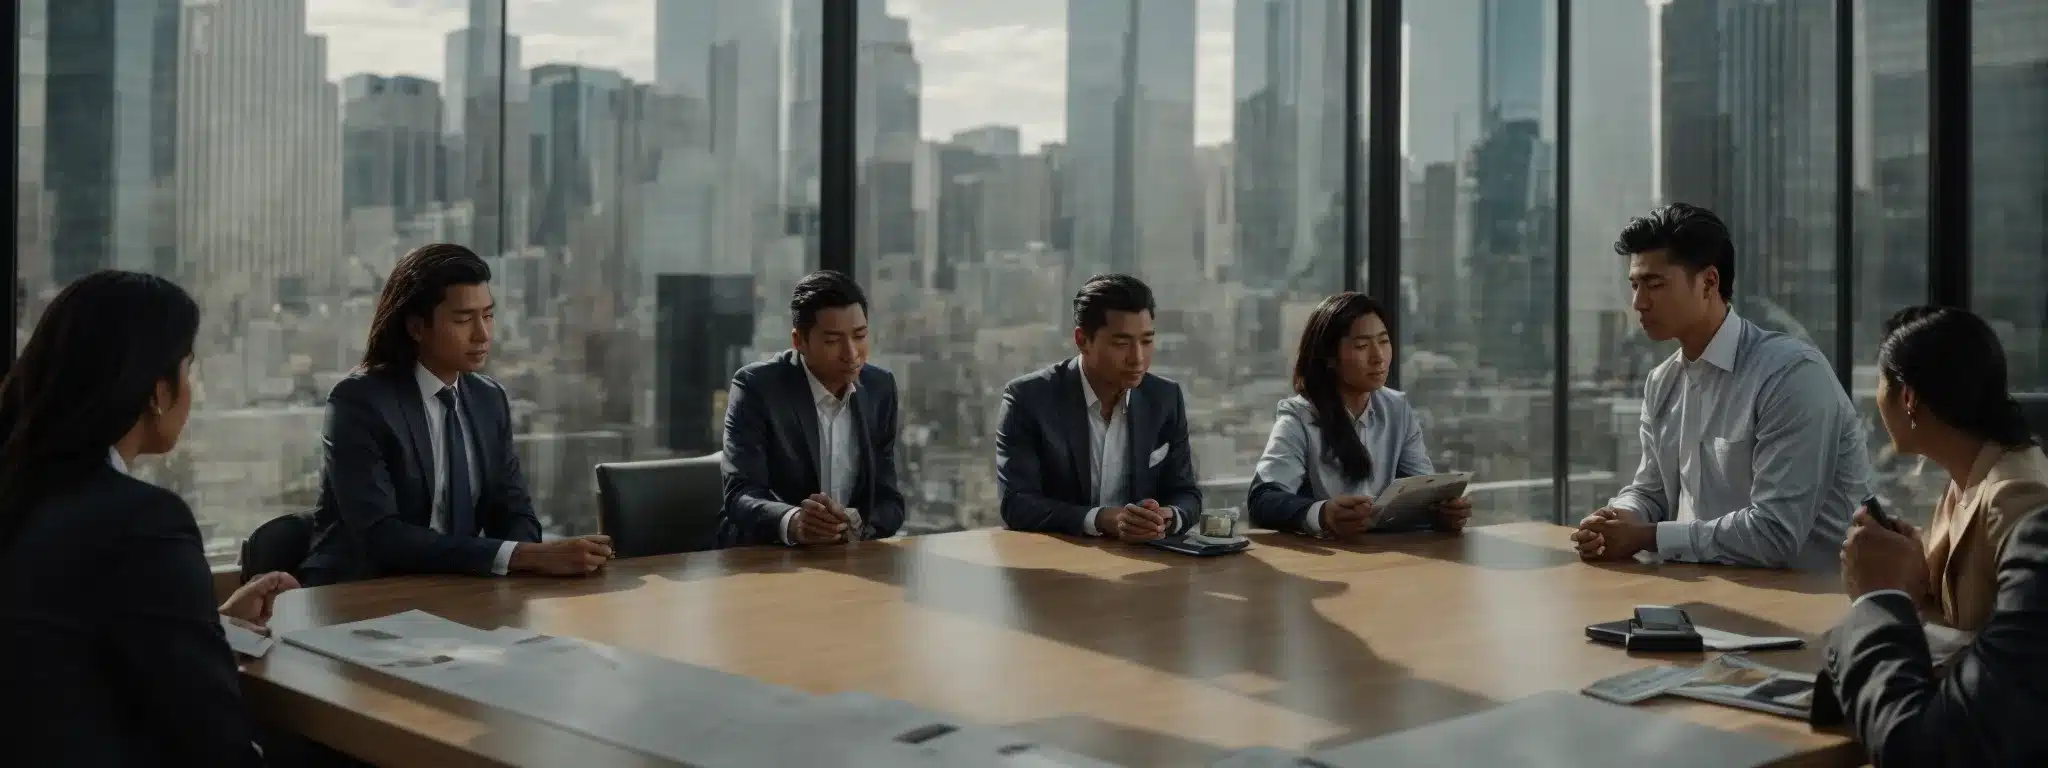 A Business Team Gathered Around A Strategy Board, While Bustling City Life Flows In The Background Through A Large Window.